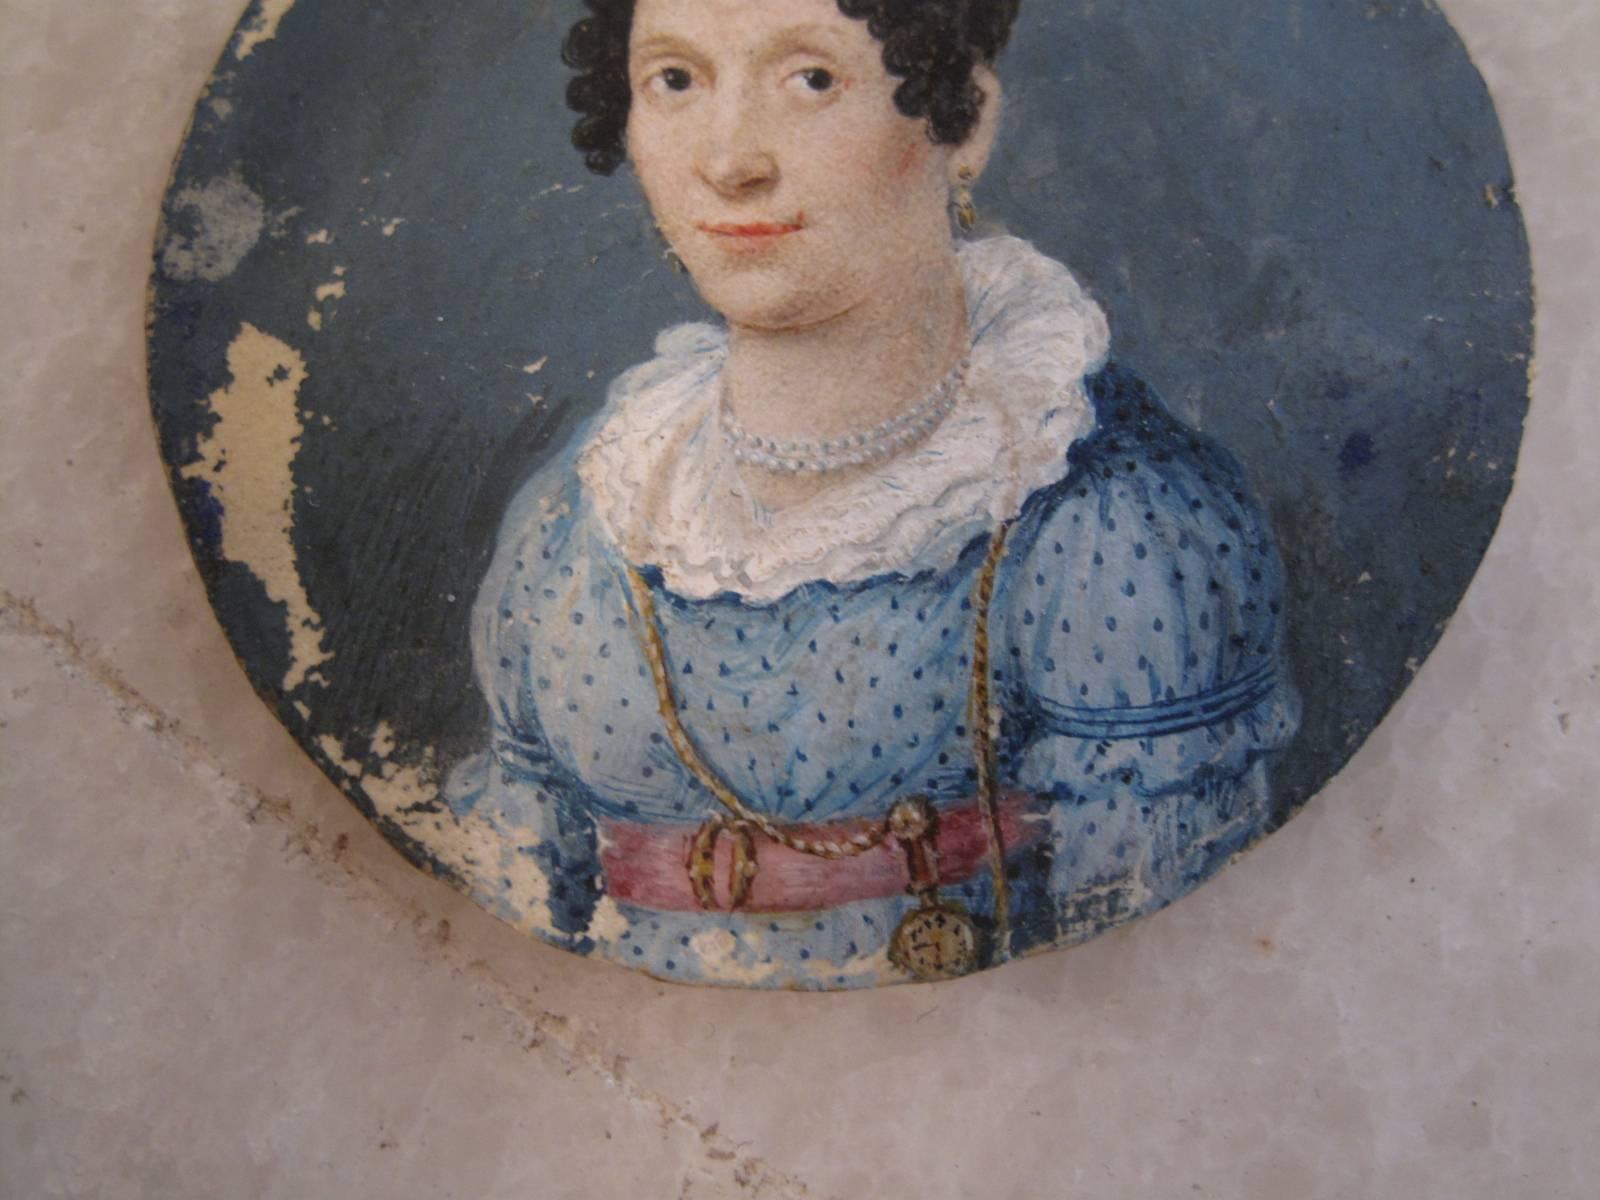 Highly detailed painting in miniature on hand cut piece of parchment. Unknown female subject. Early to mid-19th century.